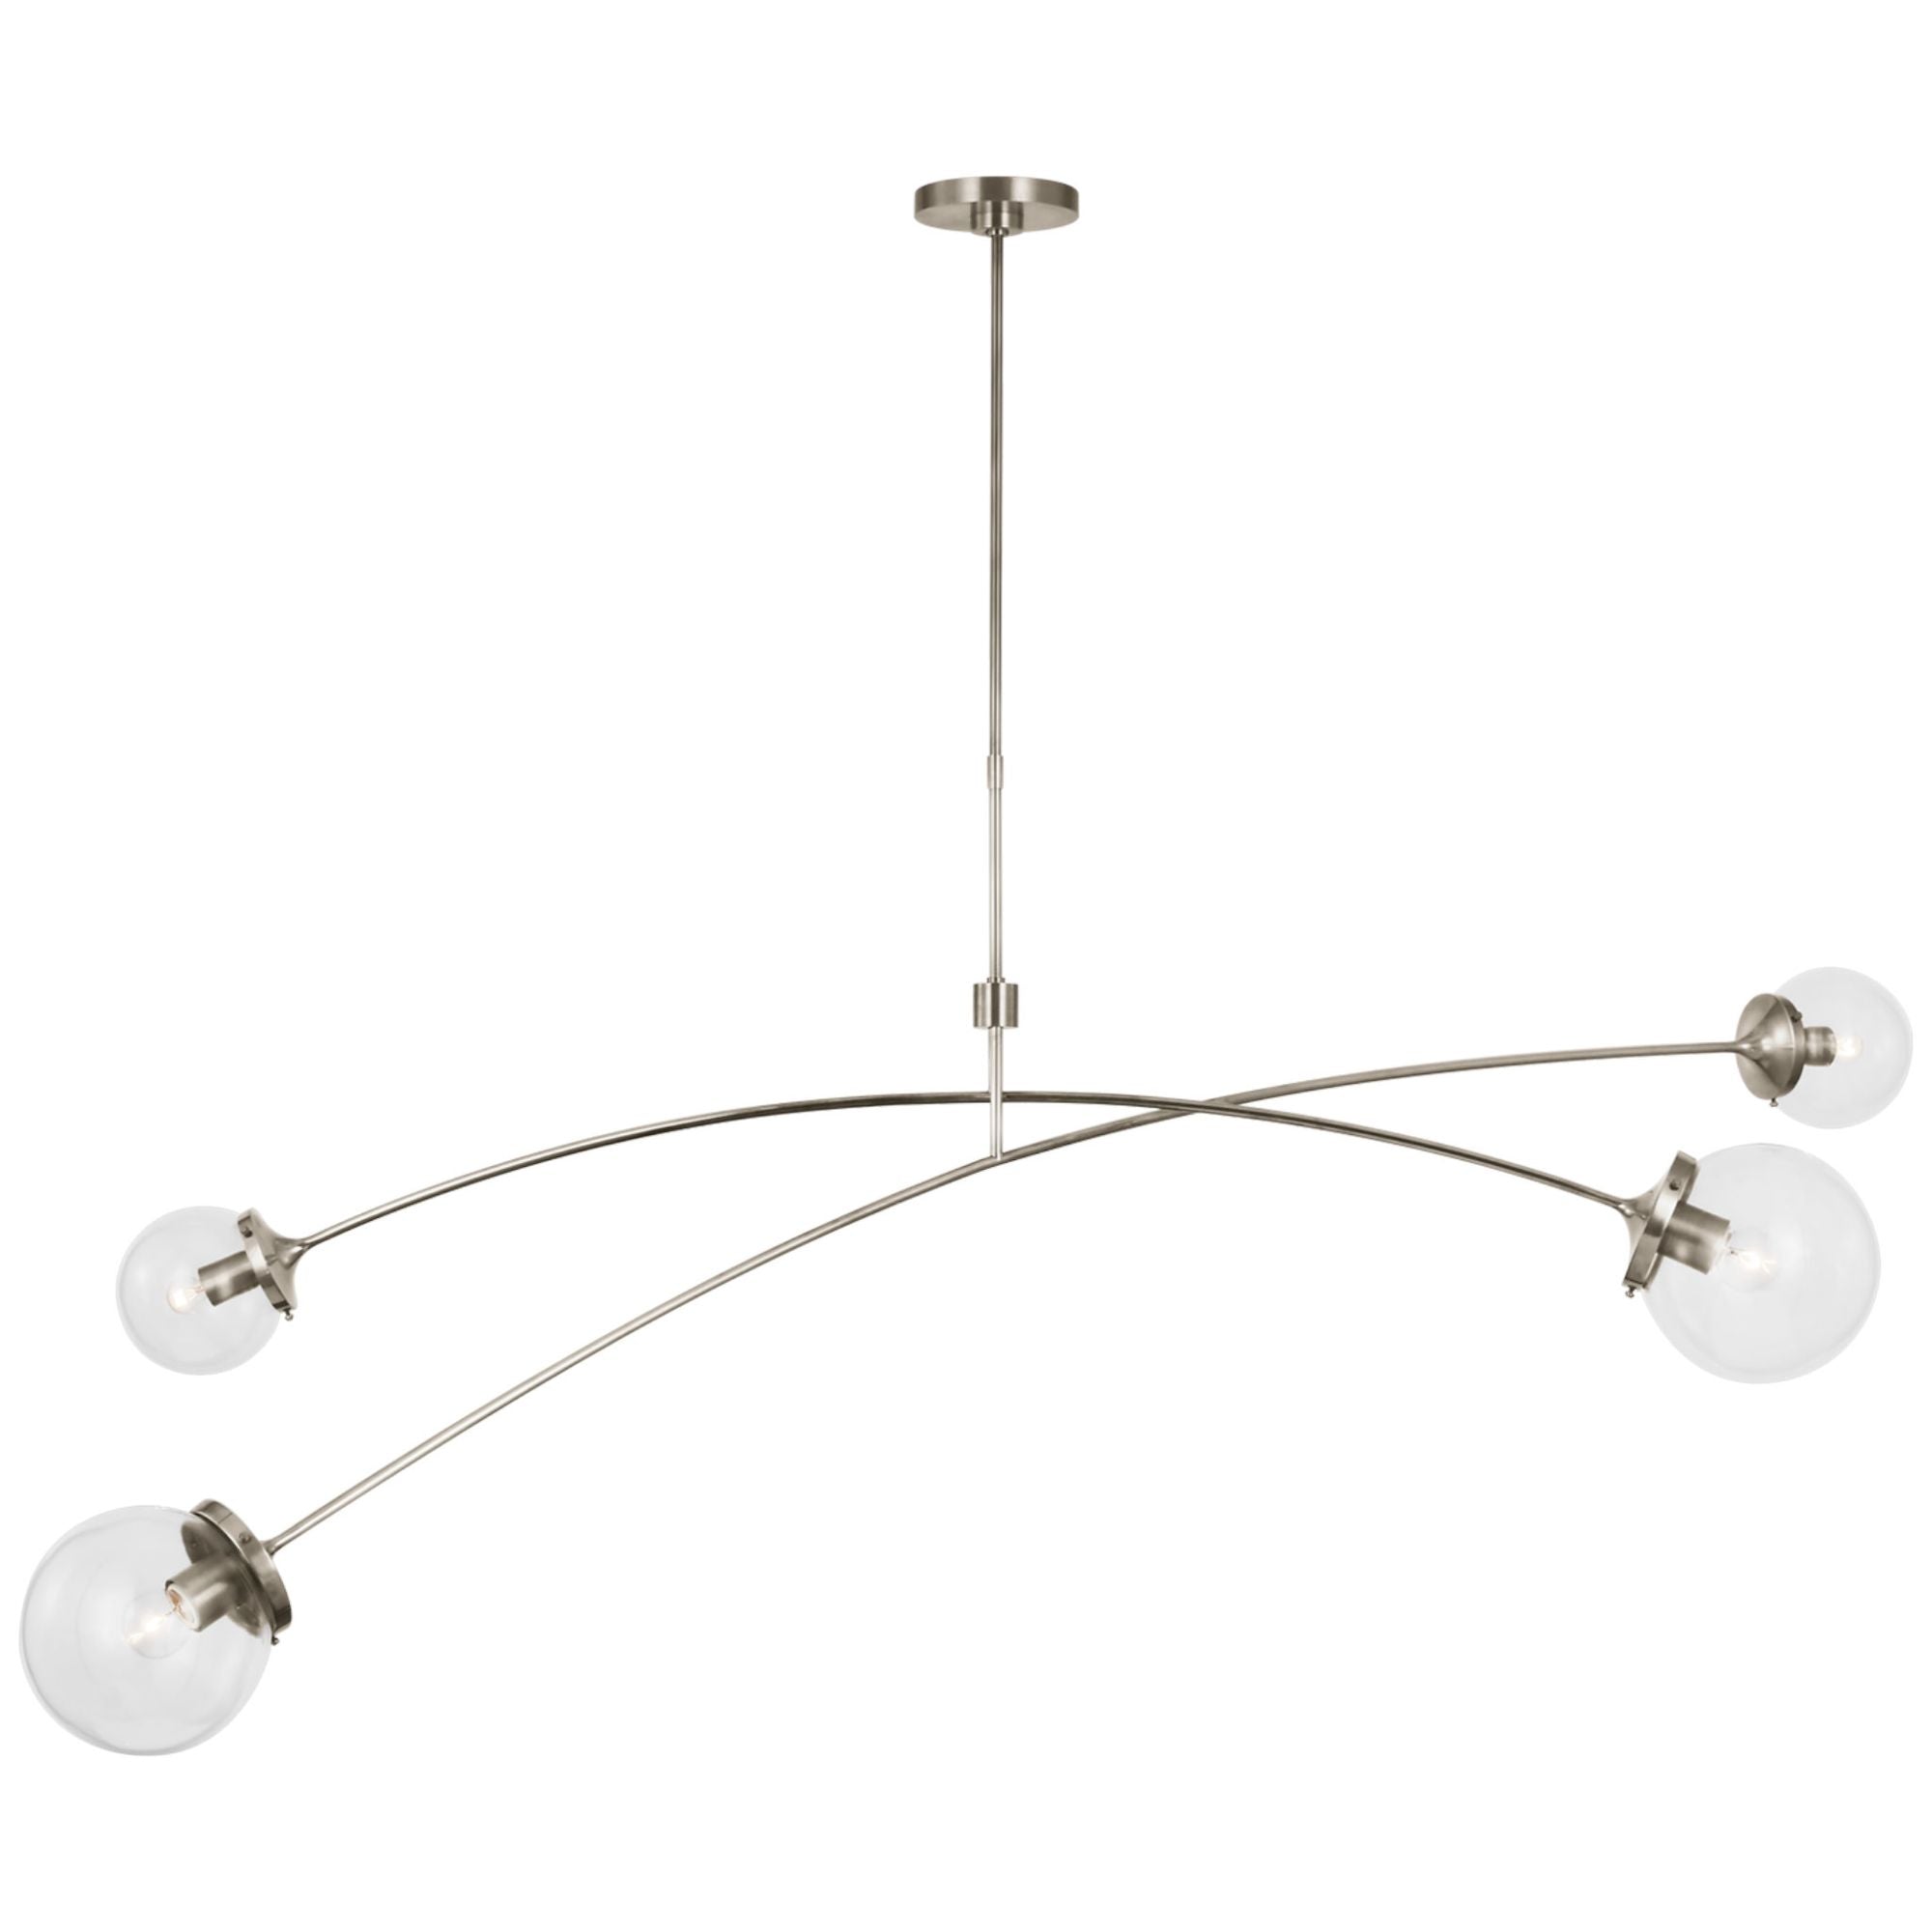 kate spade new york Prescott 69" Linear Chandelier in Polished Nickel with Clear Glass